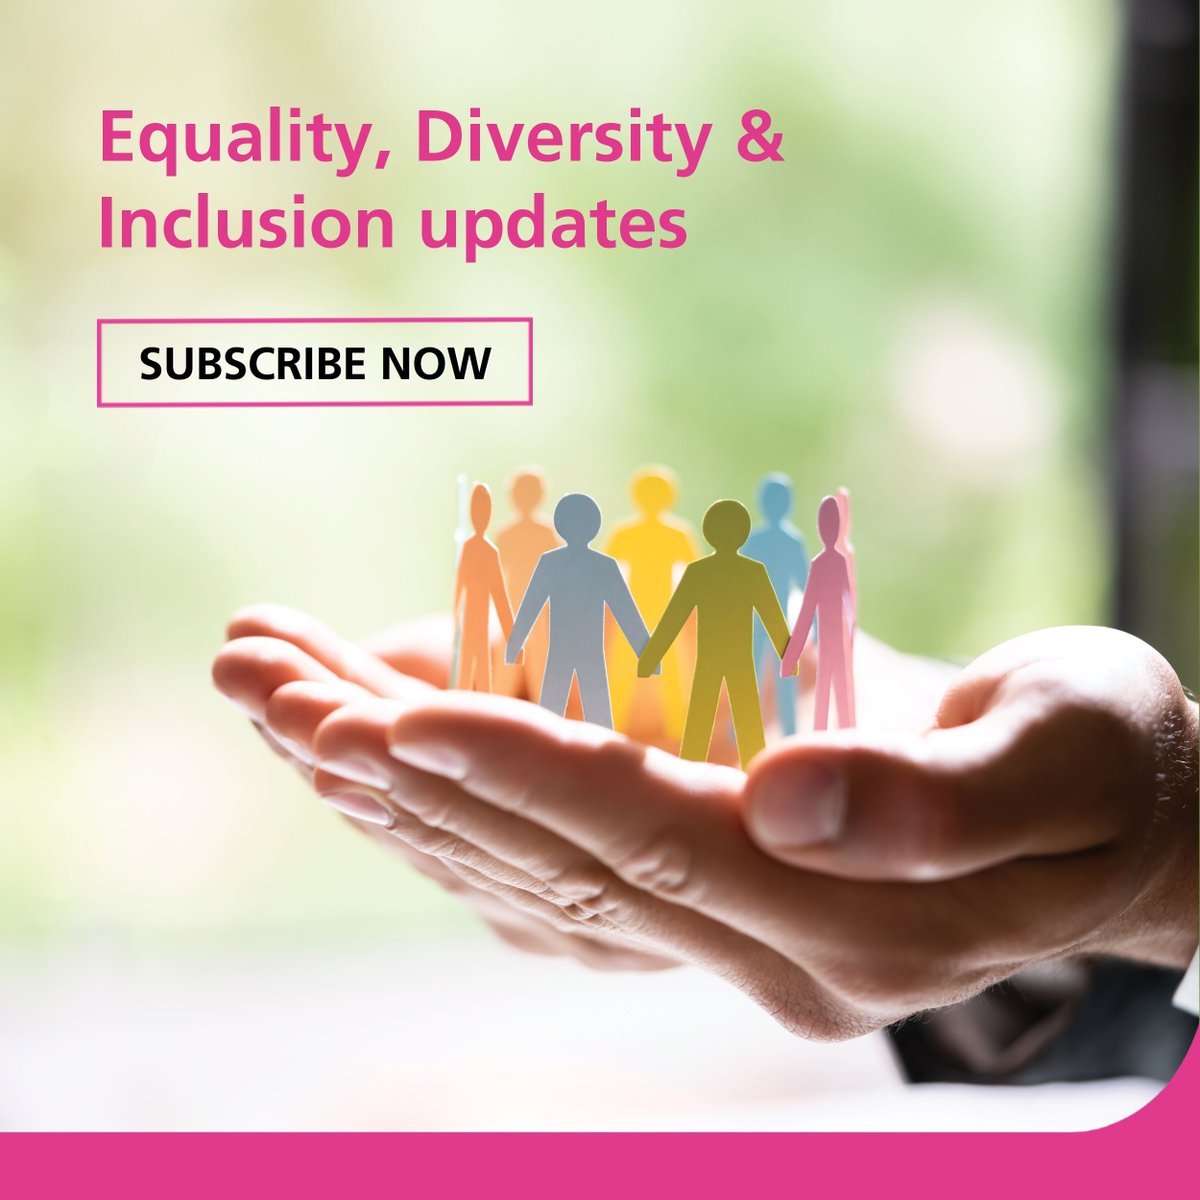 Highlights from our latest Equality, Diversity and Inclusion newsletter include new menopause guidance for employers, tips for #employers on reducing absence levels, and new government, #Acas and #EHRC guidance. Sign up now for future updates: buff.ly/3QB3dGg